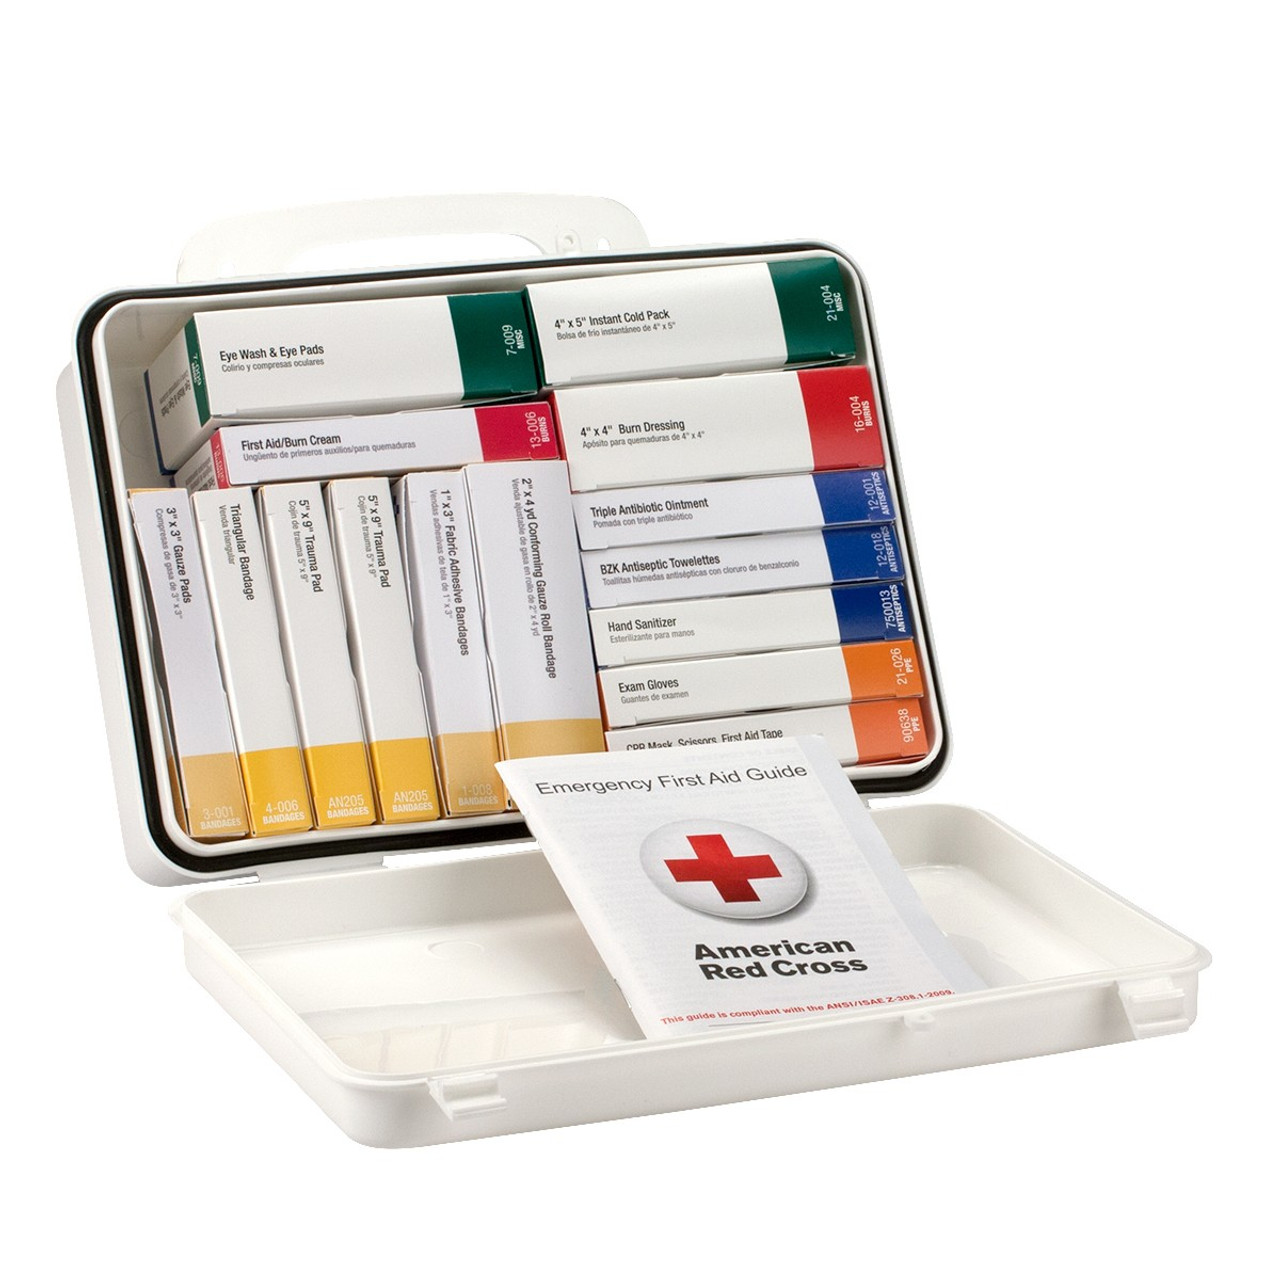 Rapid Care First Aid Kit (3 Pack) 35 Piece All In One Mini